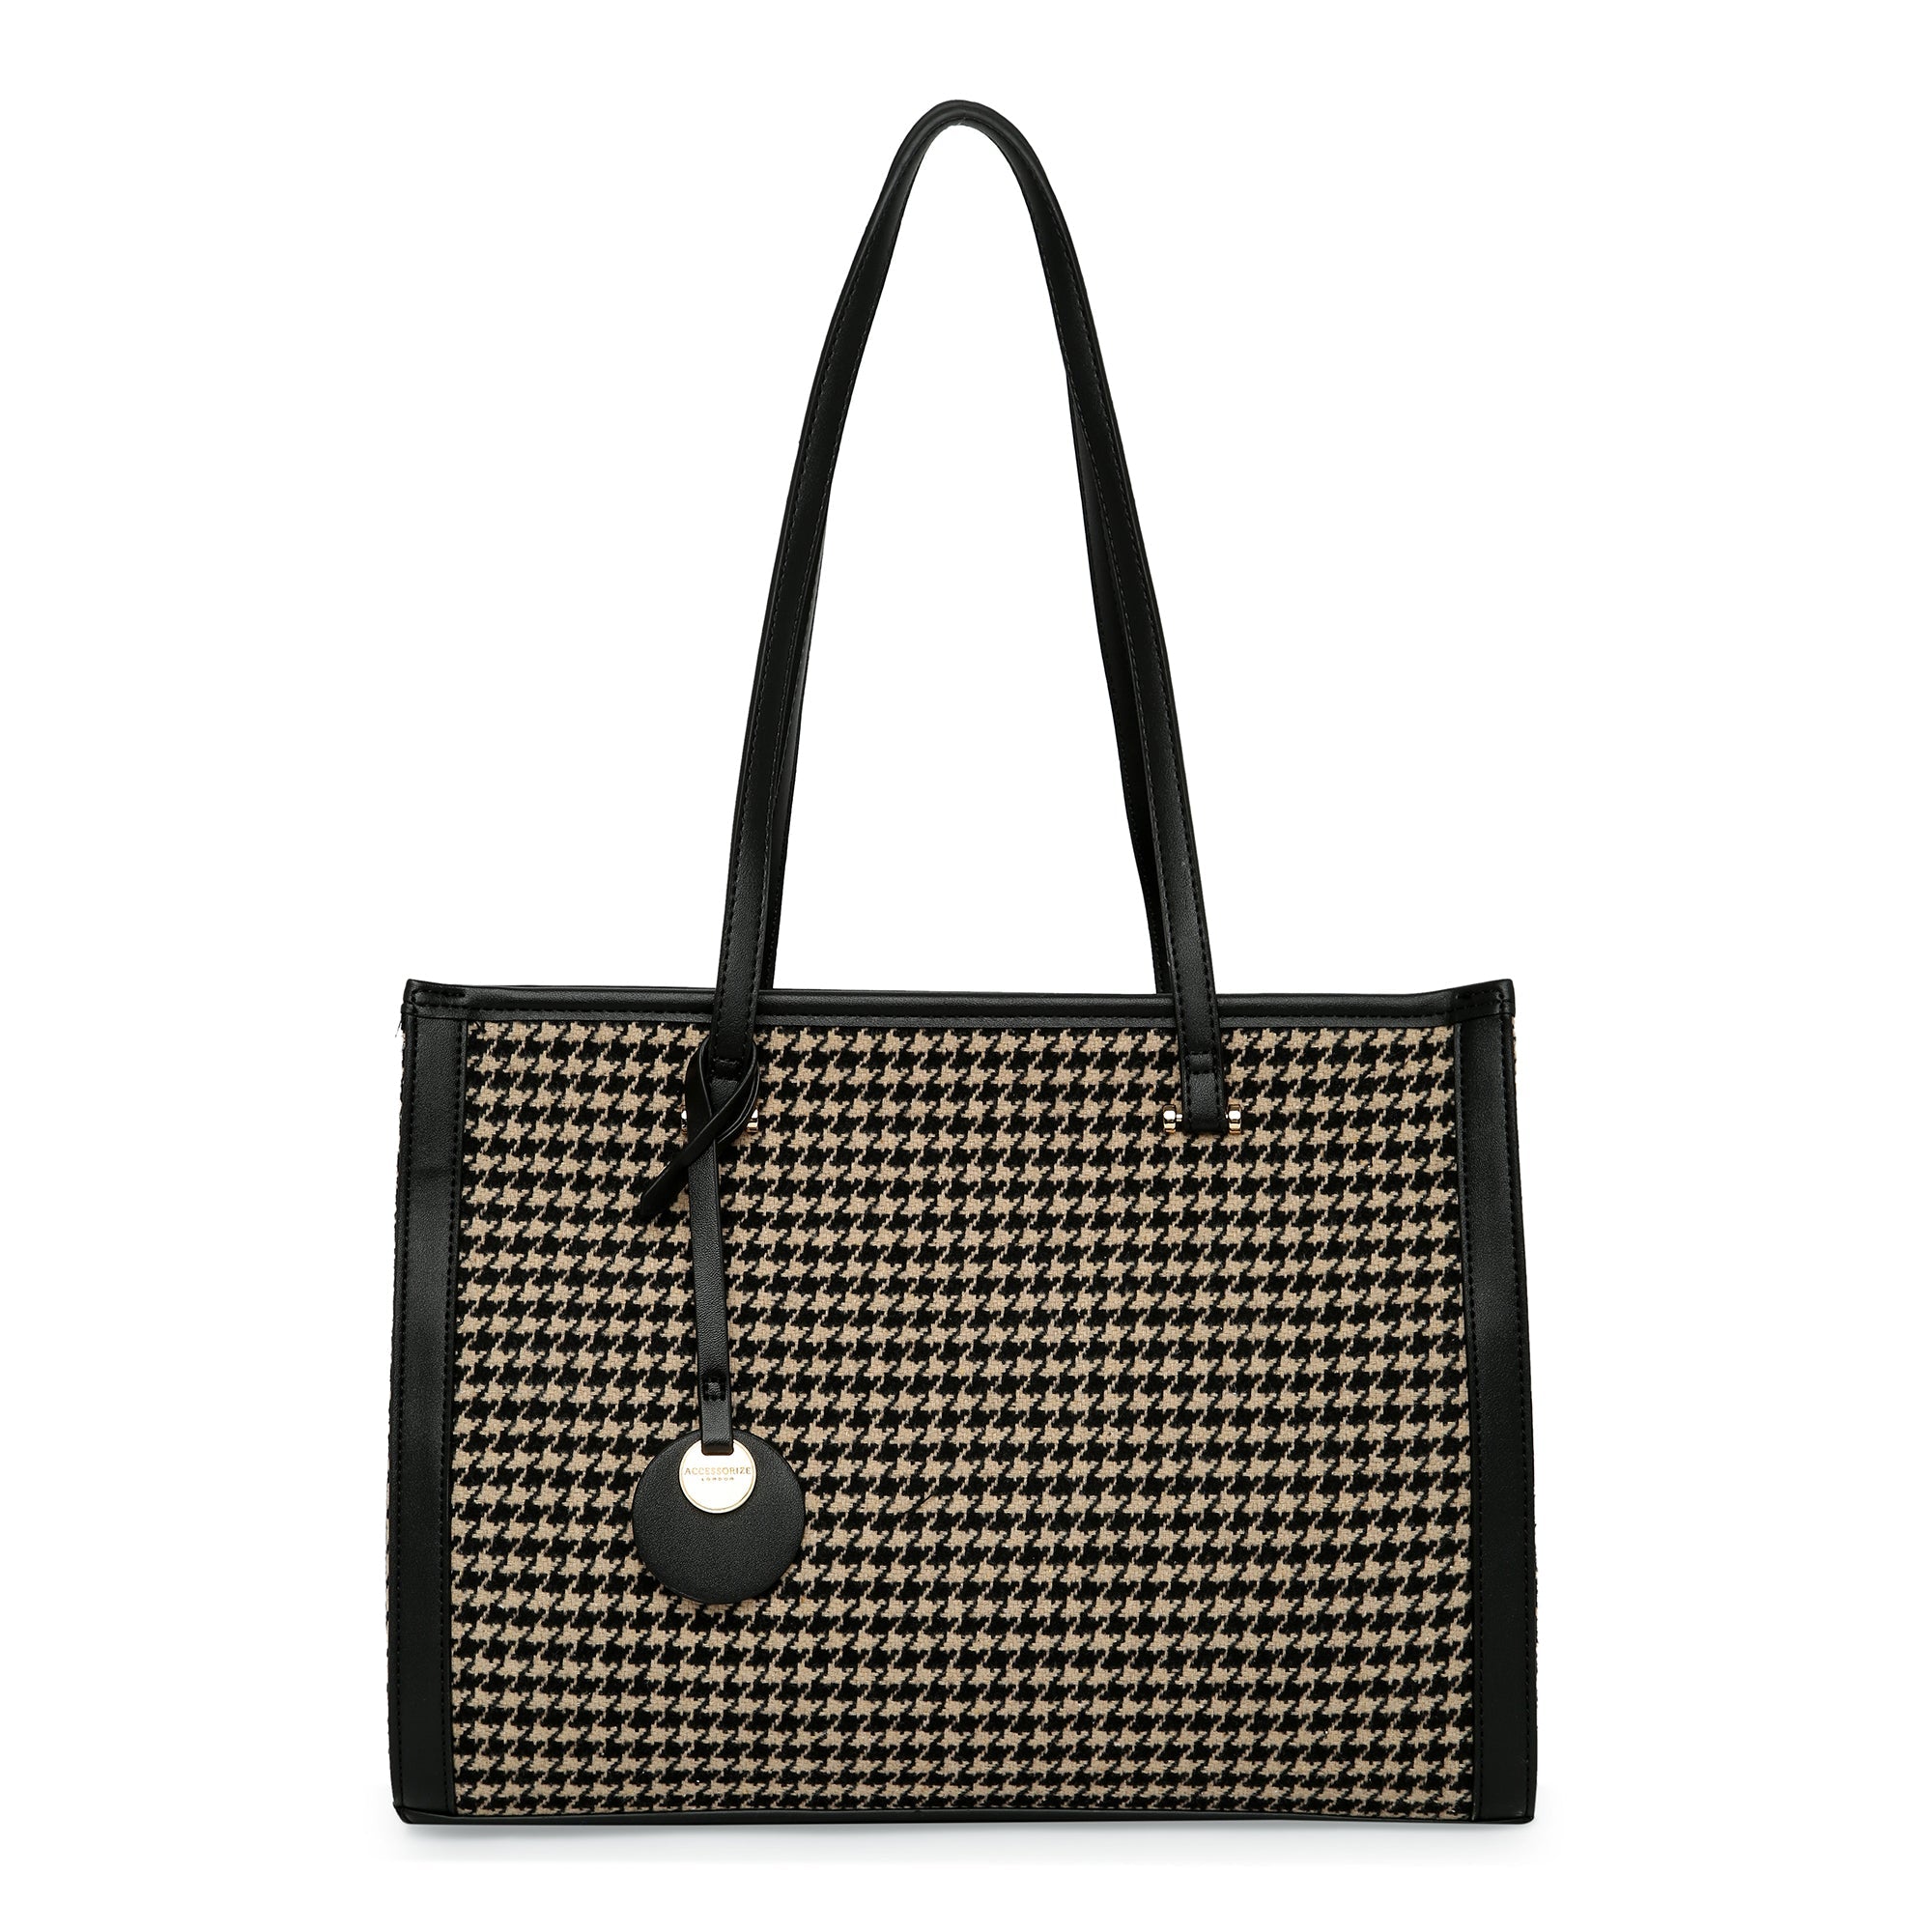 Tote Bag - Buy Latest Tote Bags For Women & Girls Online